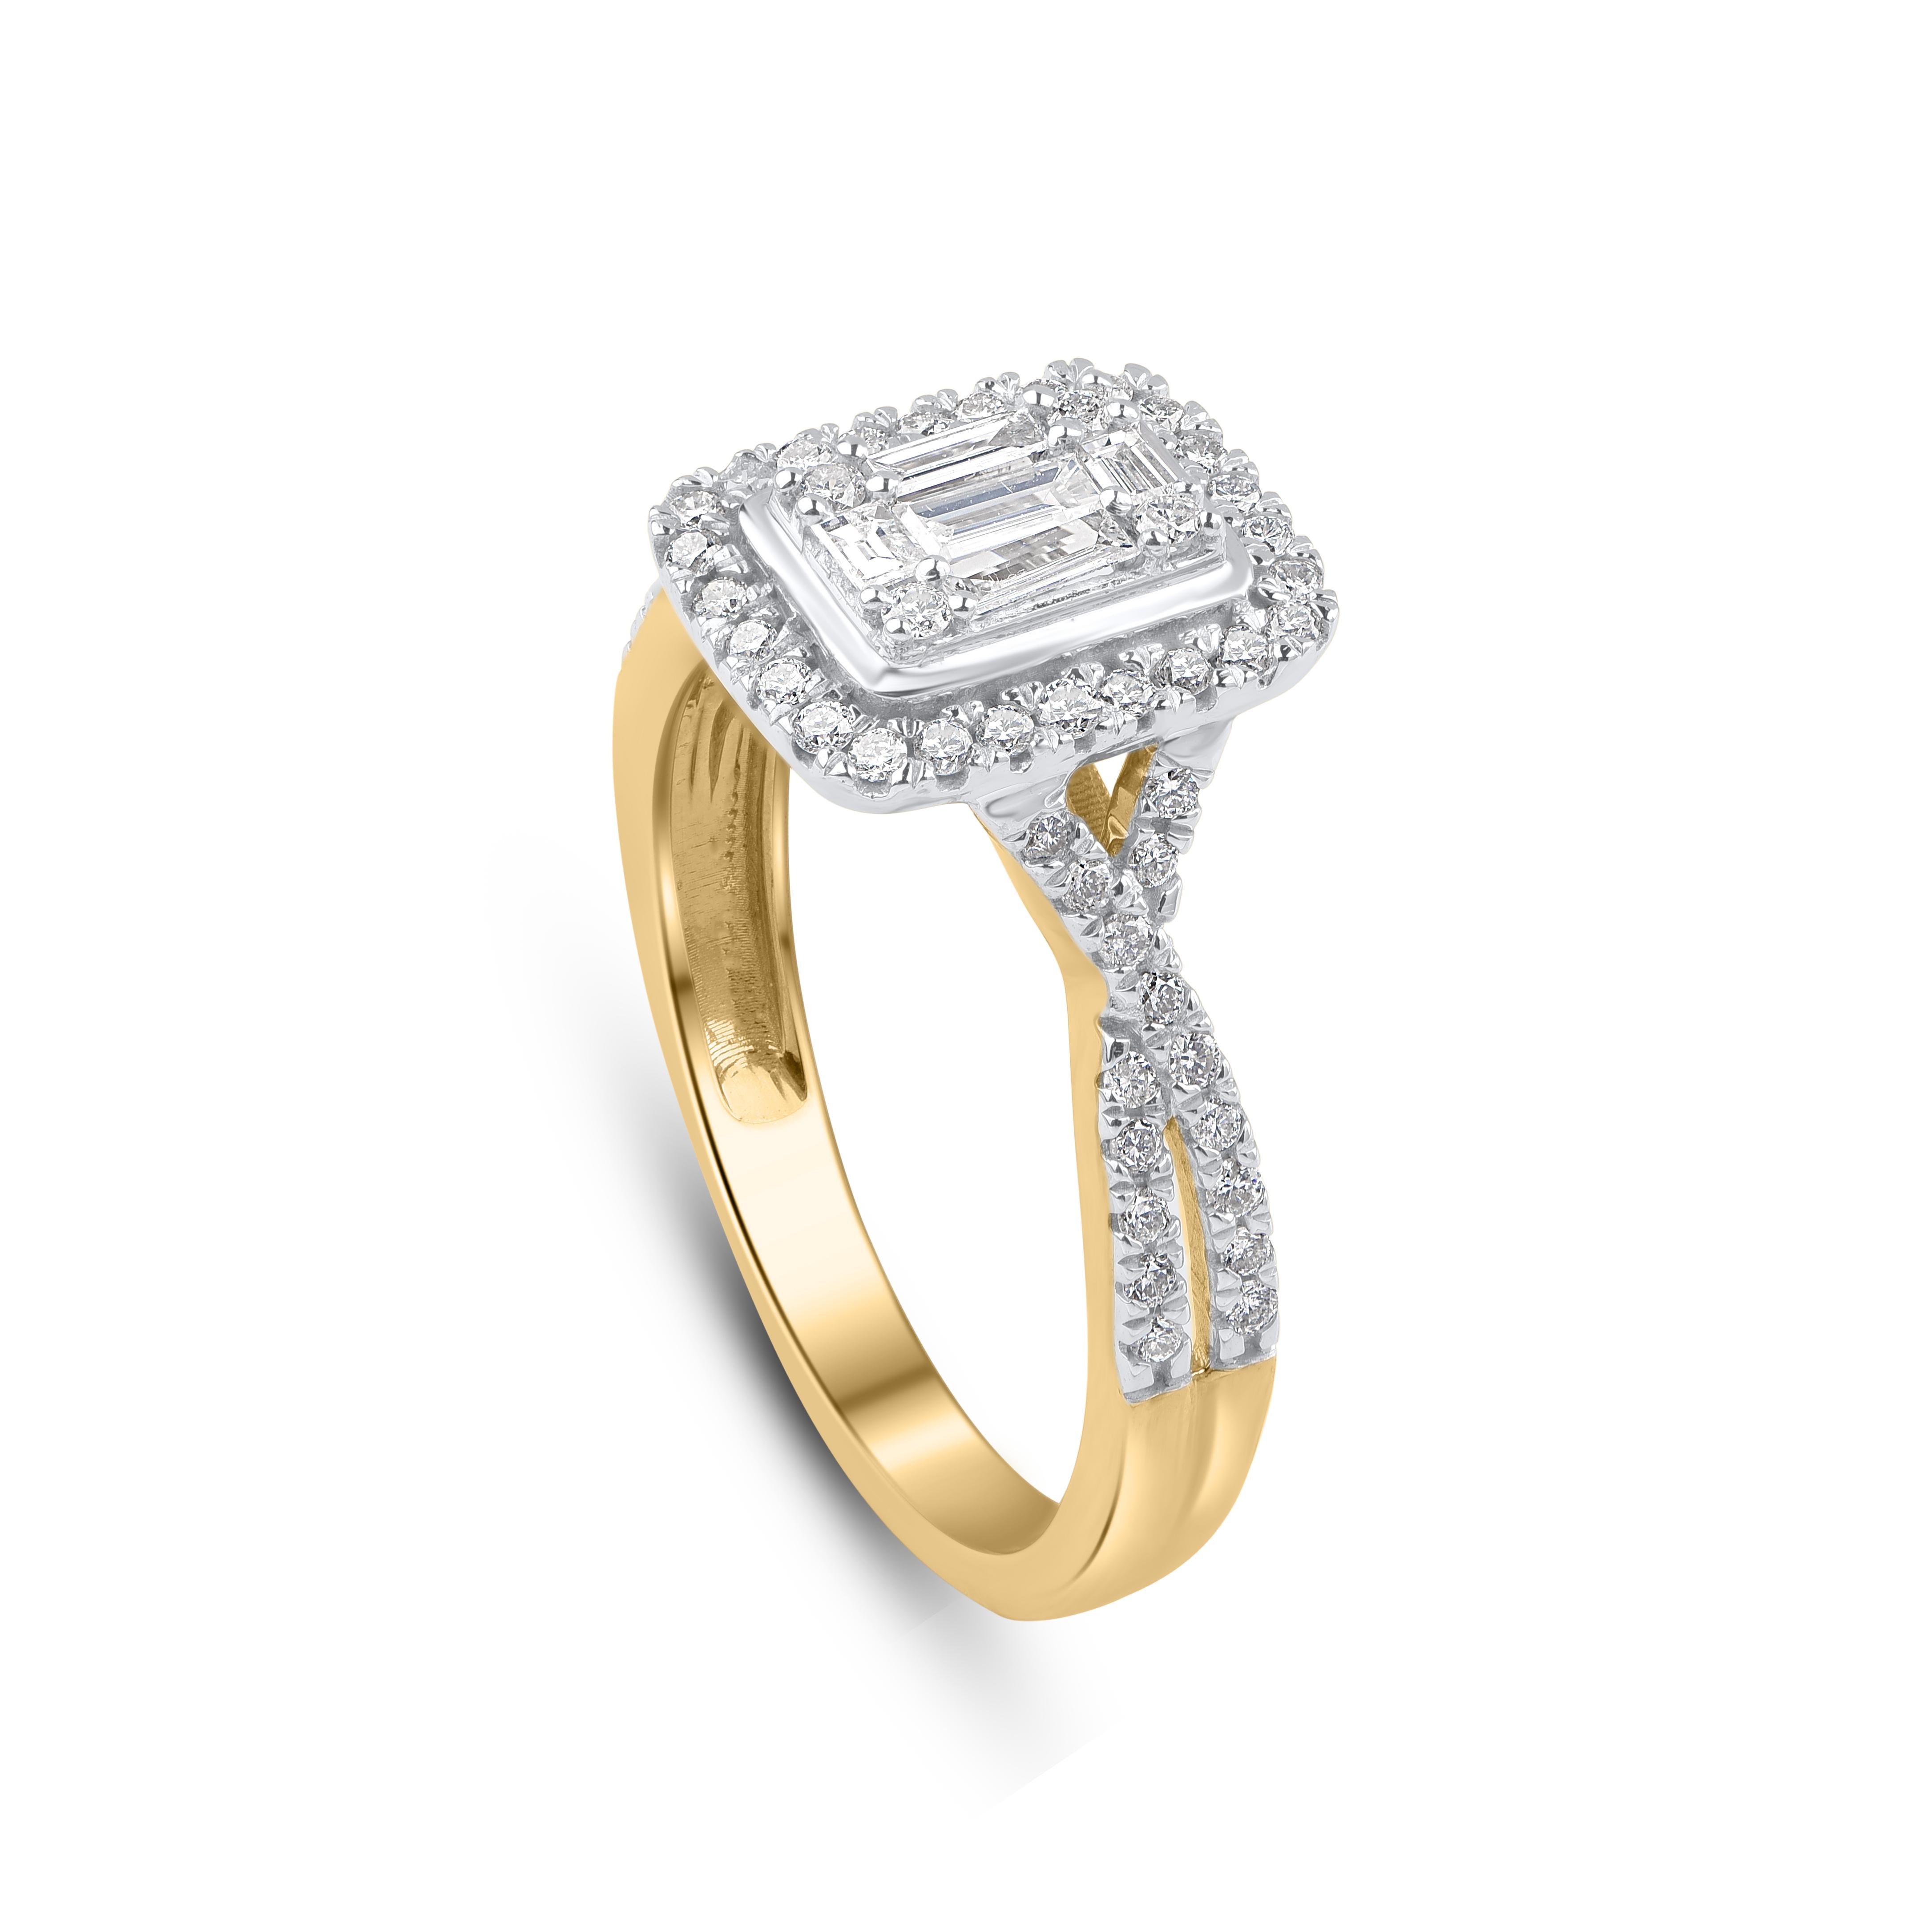 This diamond engagement ring is studded with 62 round-cut and 5 baguette diamonds in micro-prong and prong setting and crafted in 10 kt yellow gold, diamonds are graded H-I Color, I2 Clarity. Ring size is US size 7 and can be resized on request.
